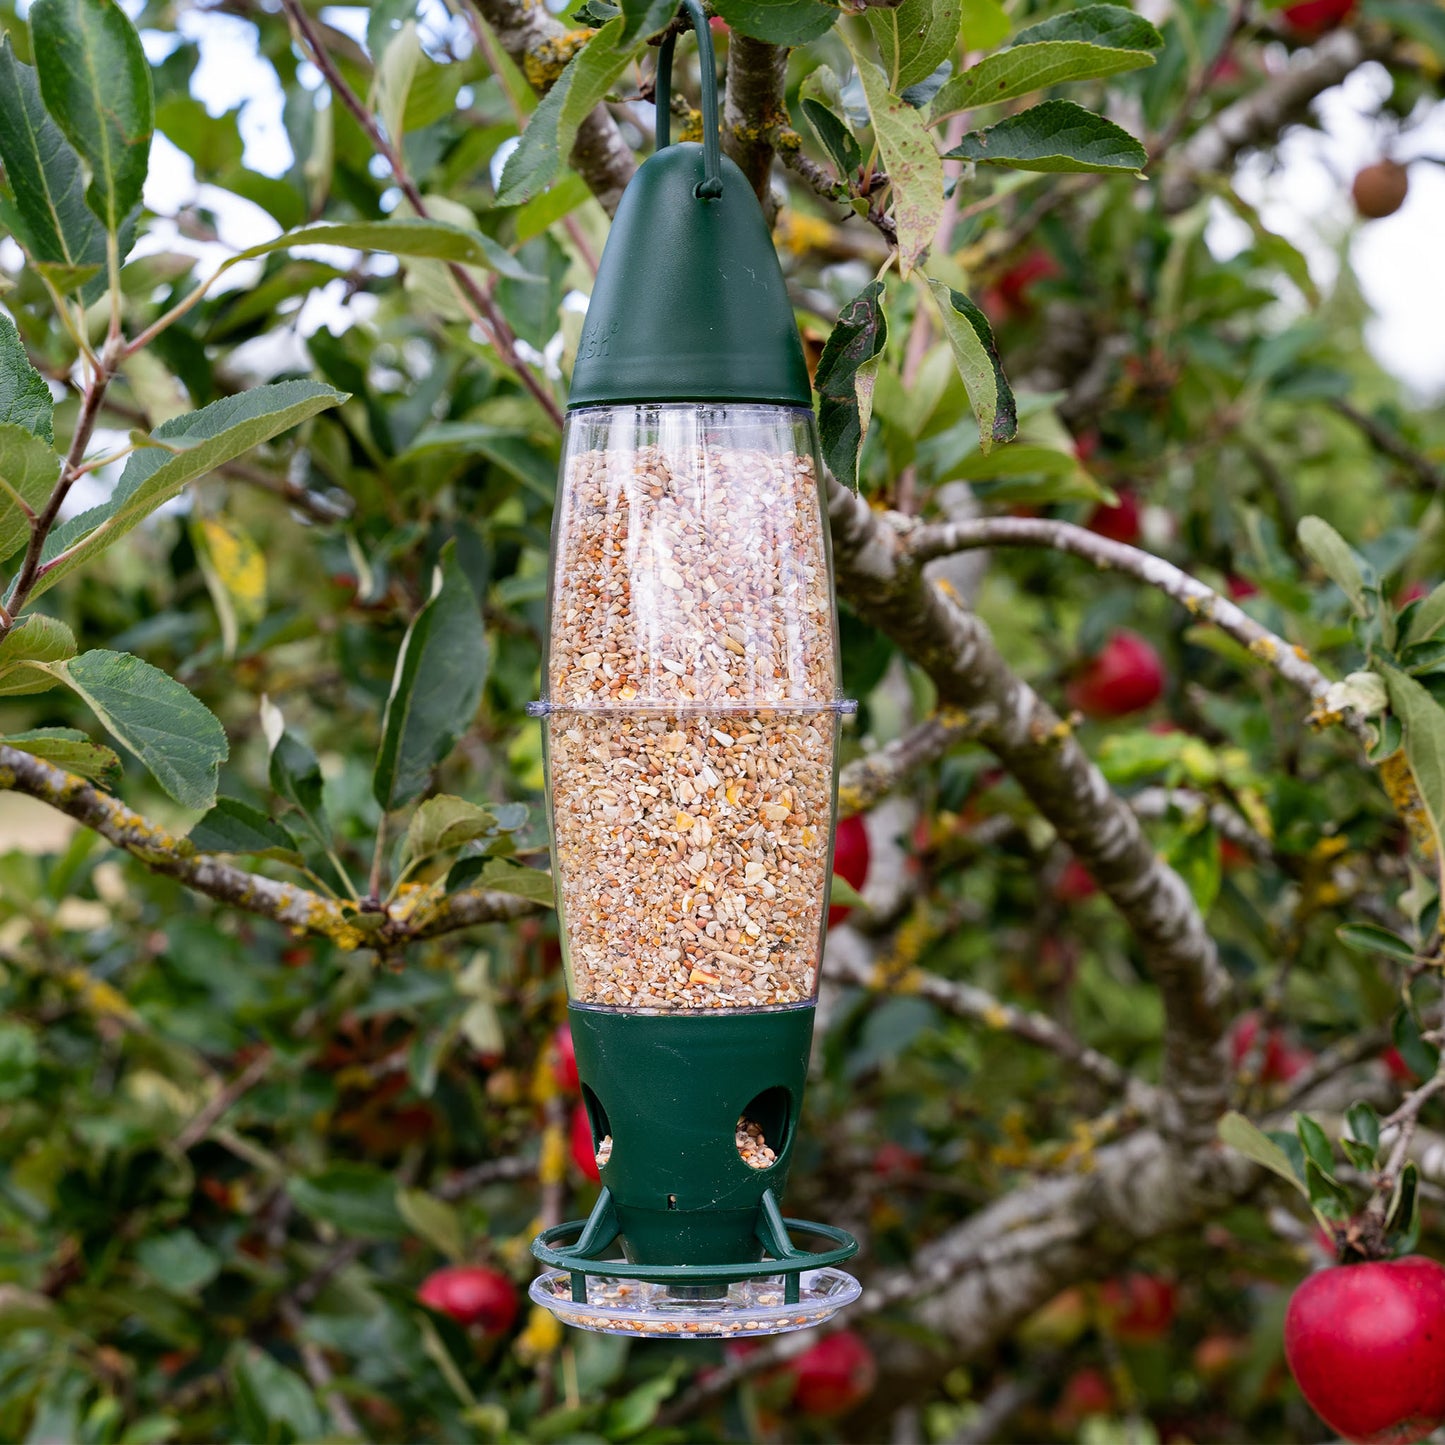 peckish 3 port feeder filled with seed hanging